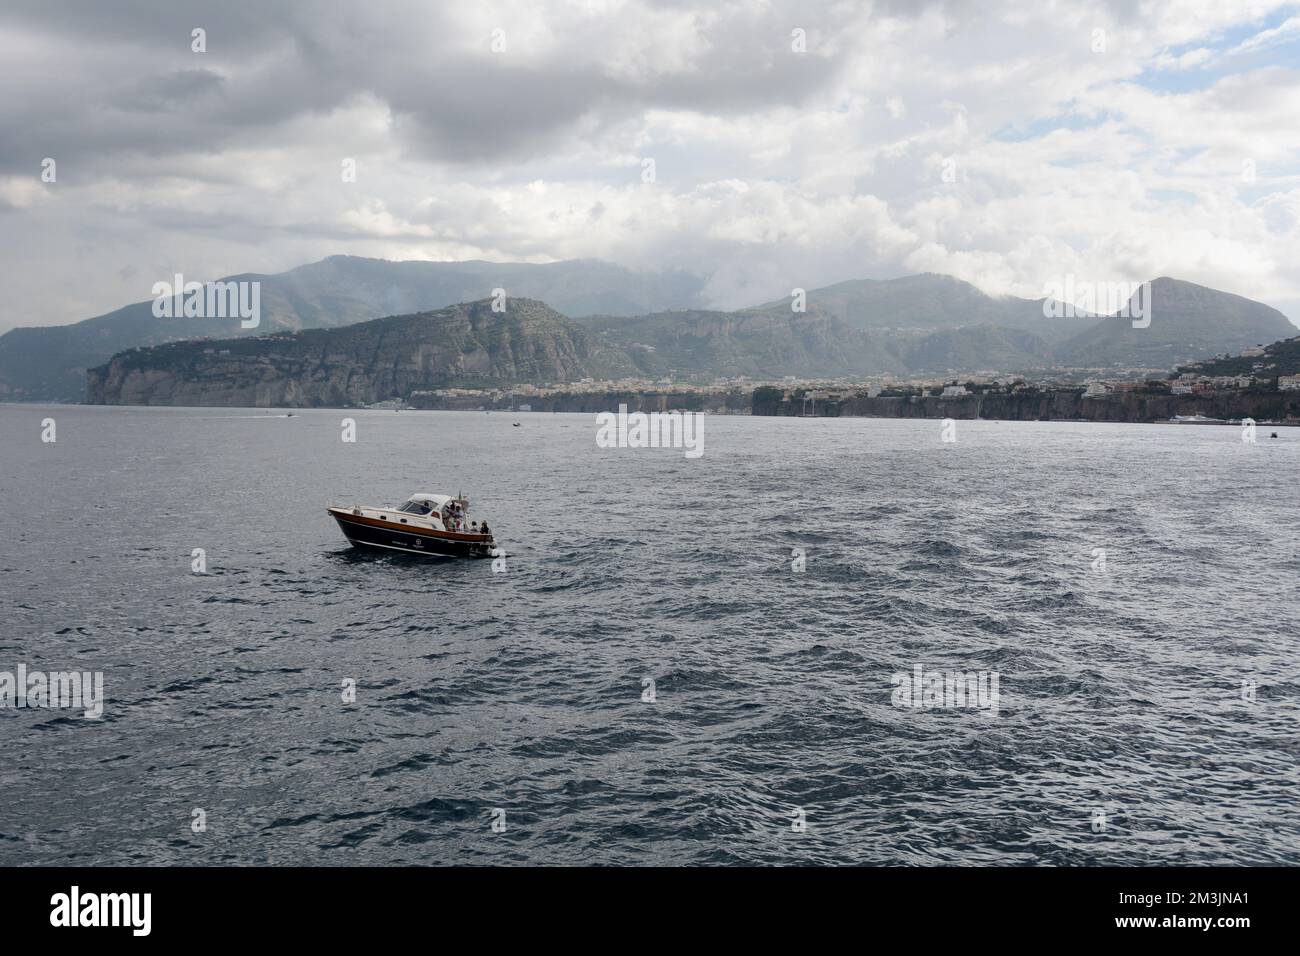 A motorboat in the Bay of Naples and the Italian city of Sorrento in the background, near the Amalfi Coast, in Campania, southern Italy. Stock Photo